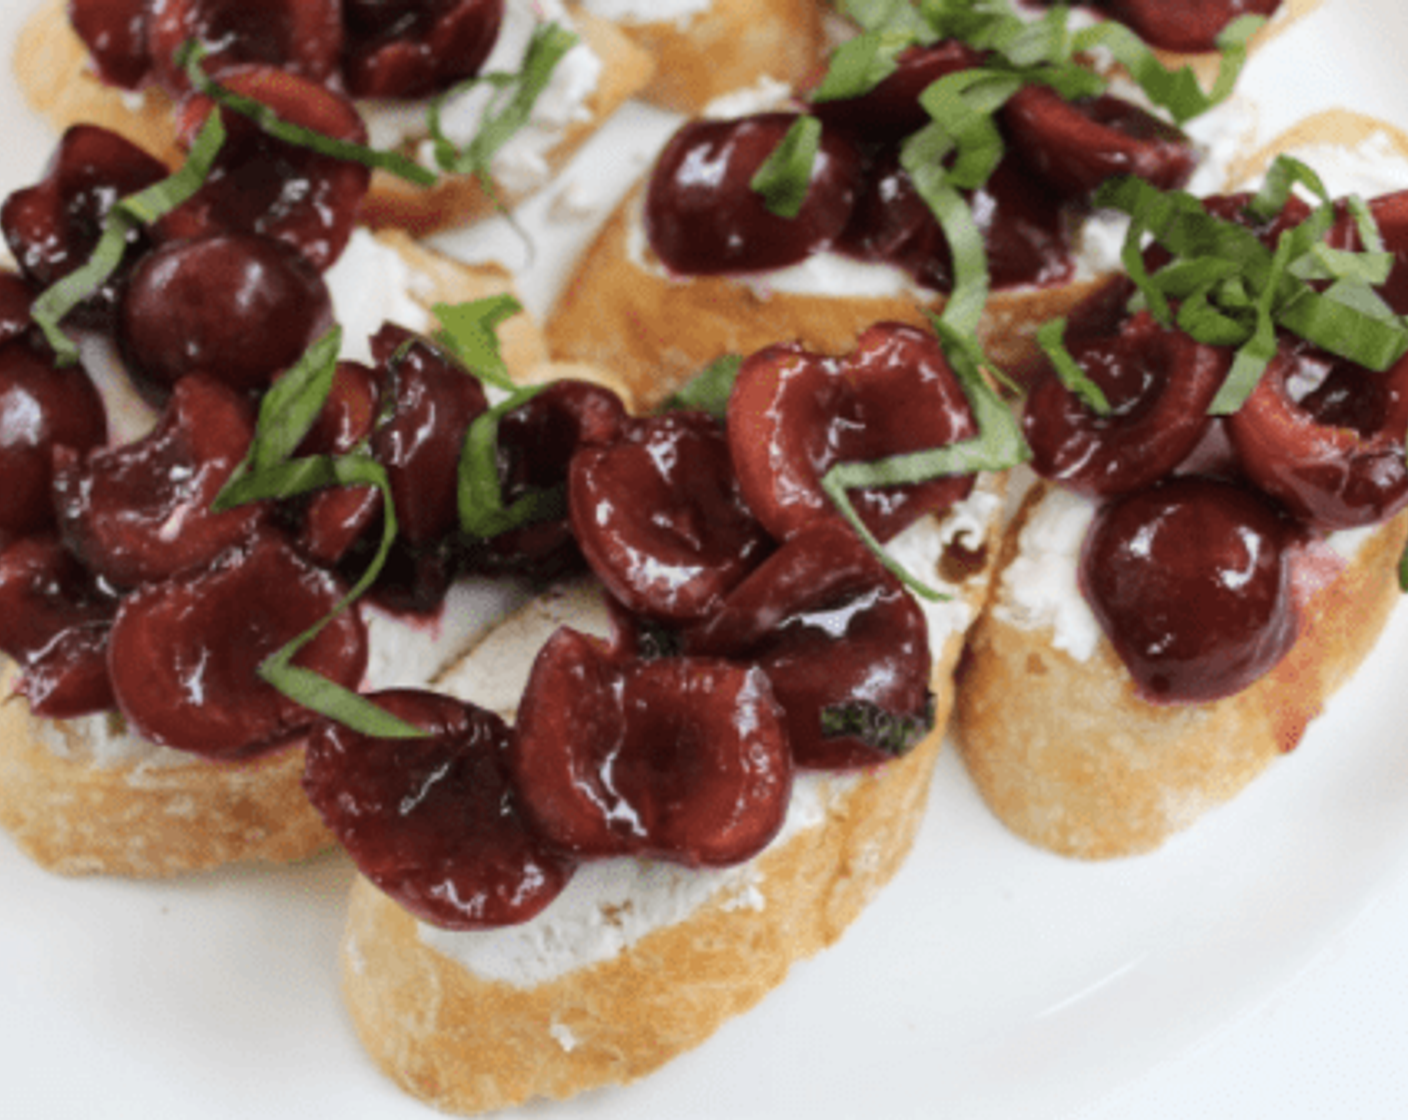 step 5 To assemble the crostini, spread a layer of Goat Cheese (1 cup) onto each baguette slice, then top with a spoonful of cooked cherries. Sprinkle the remaining Fresh Basil (2 Tbsp) over the crostini and serve immediately.